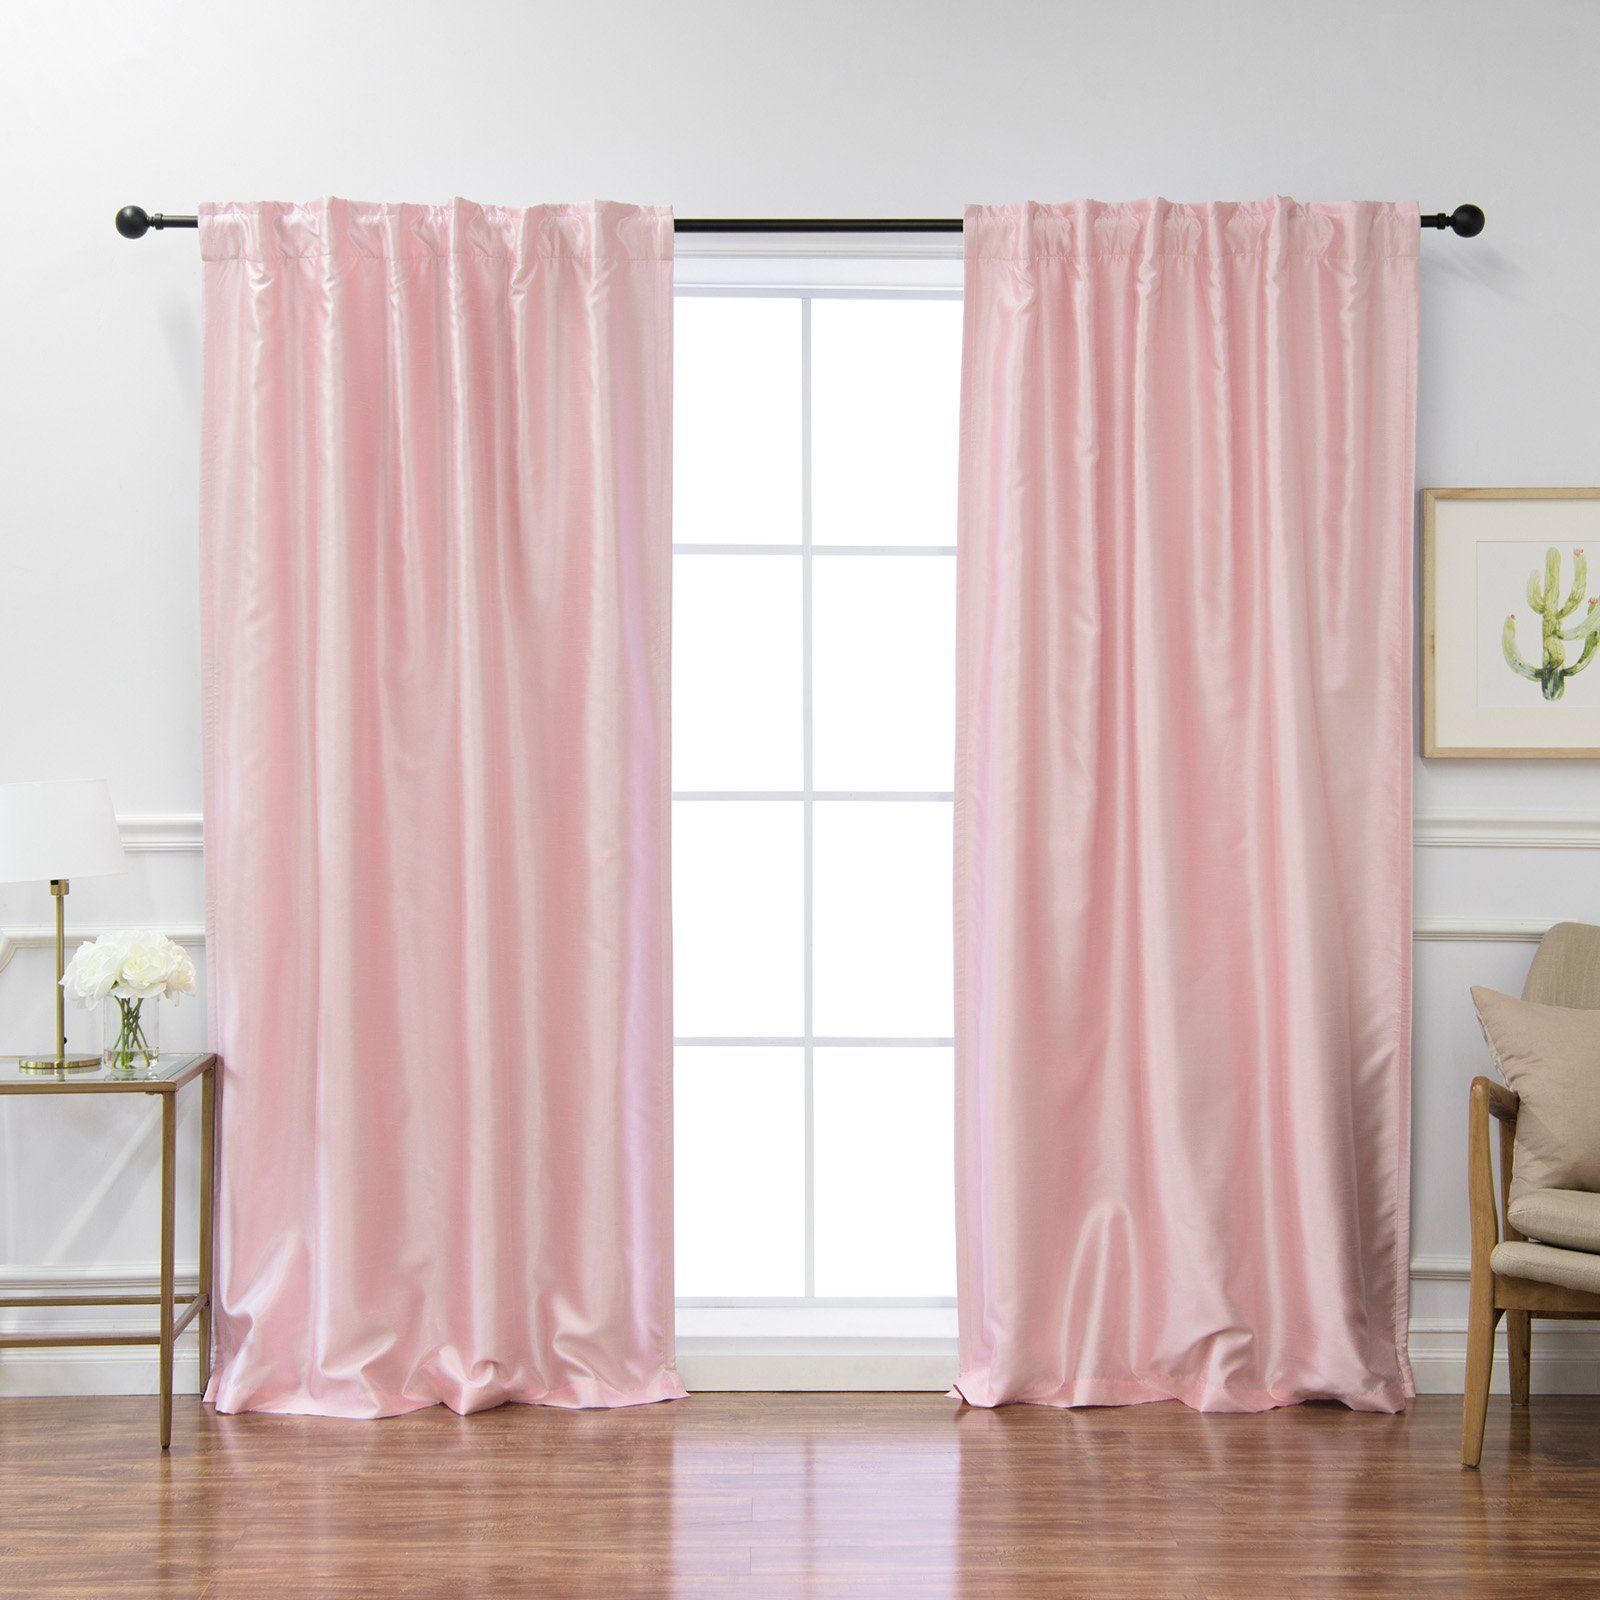 Best Home Fashion Faux Silk Blackout Curtain Panel Pair For Thermal Rod Pocket Blackout Curtain Panel Pairs (View 16 of 30)